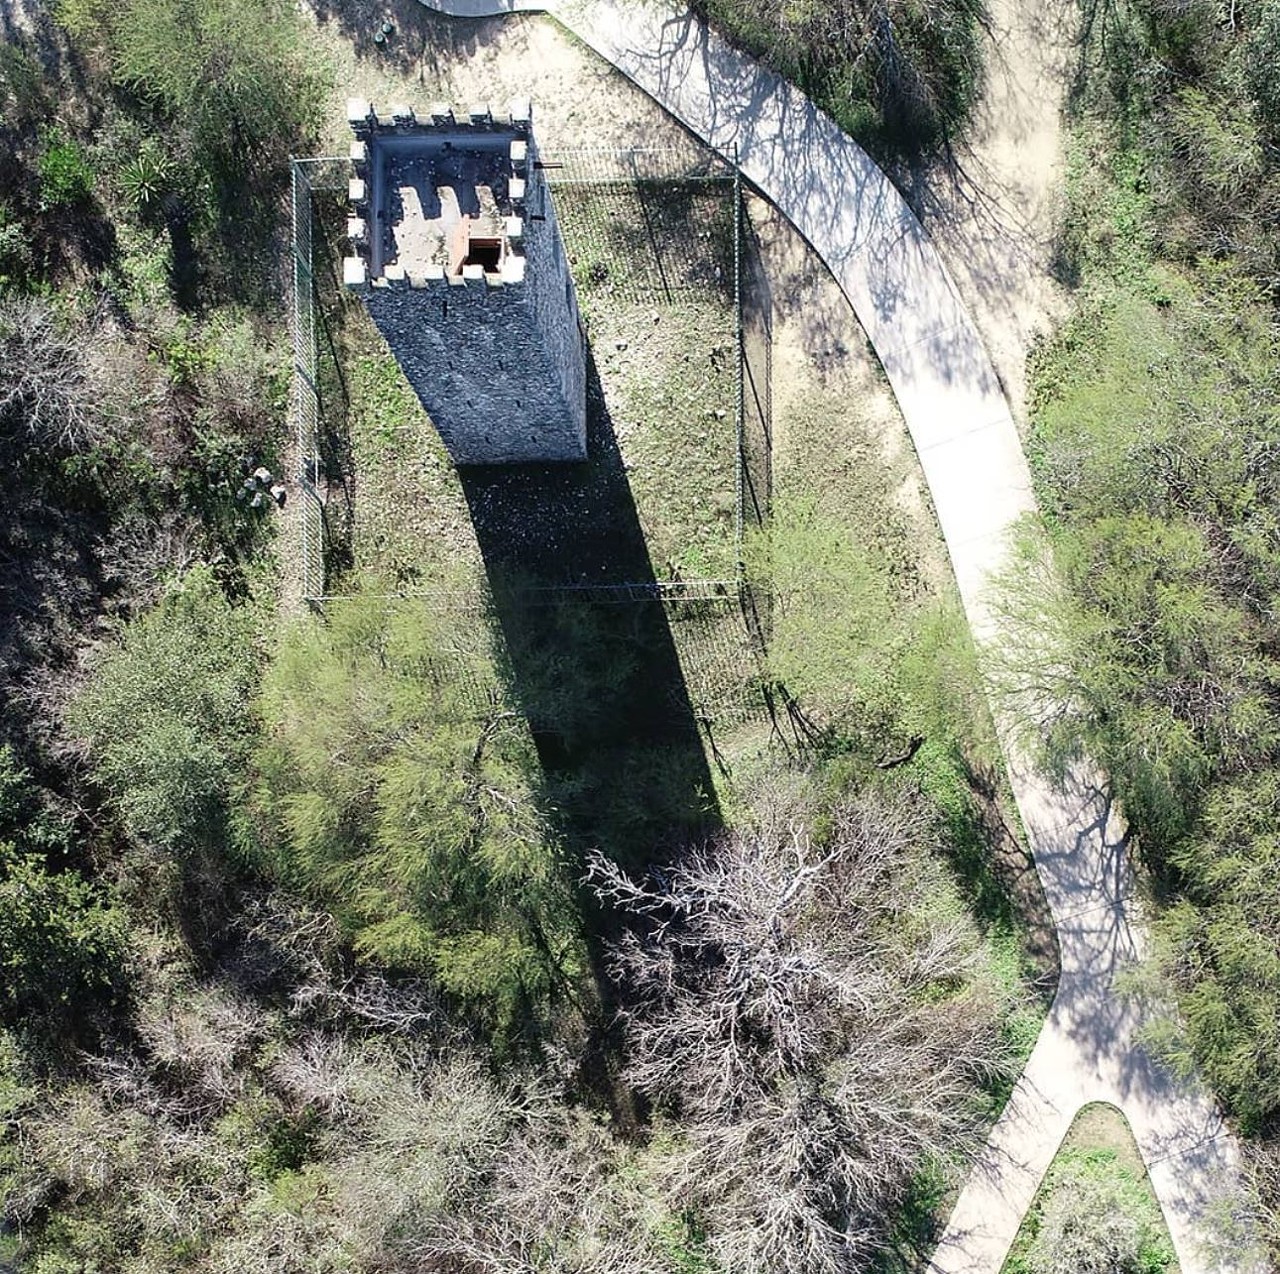 Comanche Lookout Park
15551 Nacogdoches Rd, (210) 207-7275, sanantonio.gov
Could this park be haunted? Some think so. With one of the highest points in Bexar County, the hill was a major landmark in the 1700s. Various tribes of Native Americans also used the grounds for hunting and warfare, so some say that you can hear drums and chanting at night. Also, can you believe that at 96 acres, Comanche Lookout Park is one of San Antonio’s smaller parks?
Photo via Instagram / summiteffects